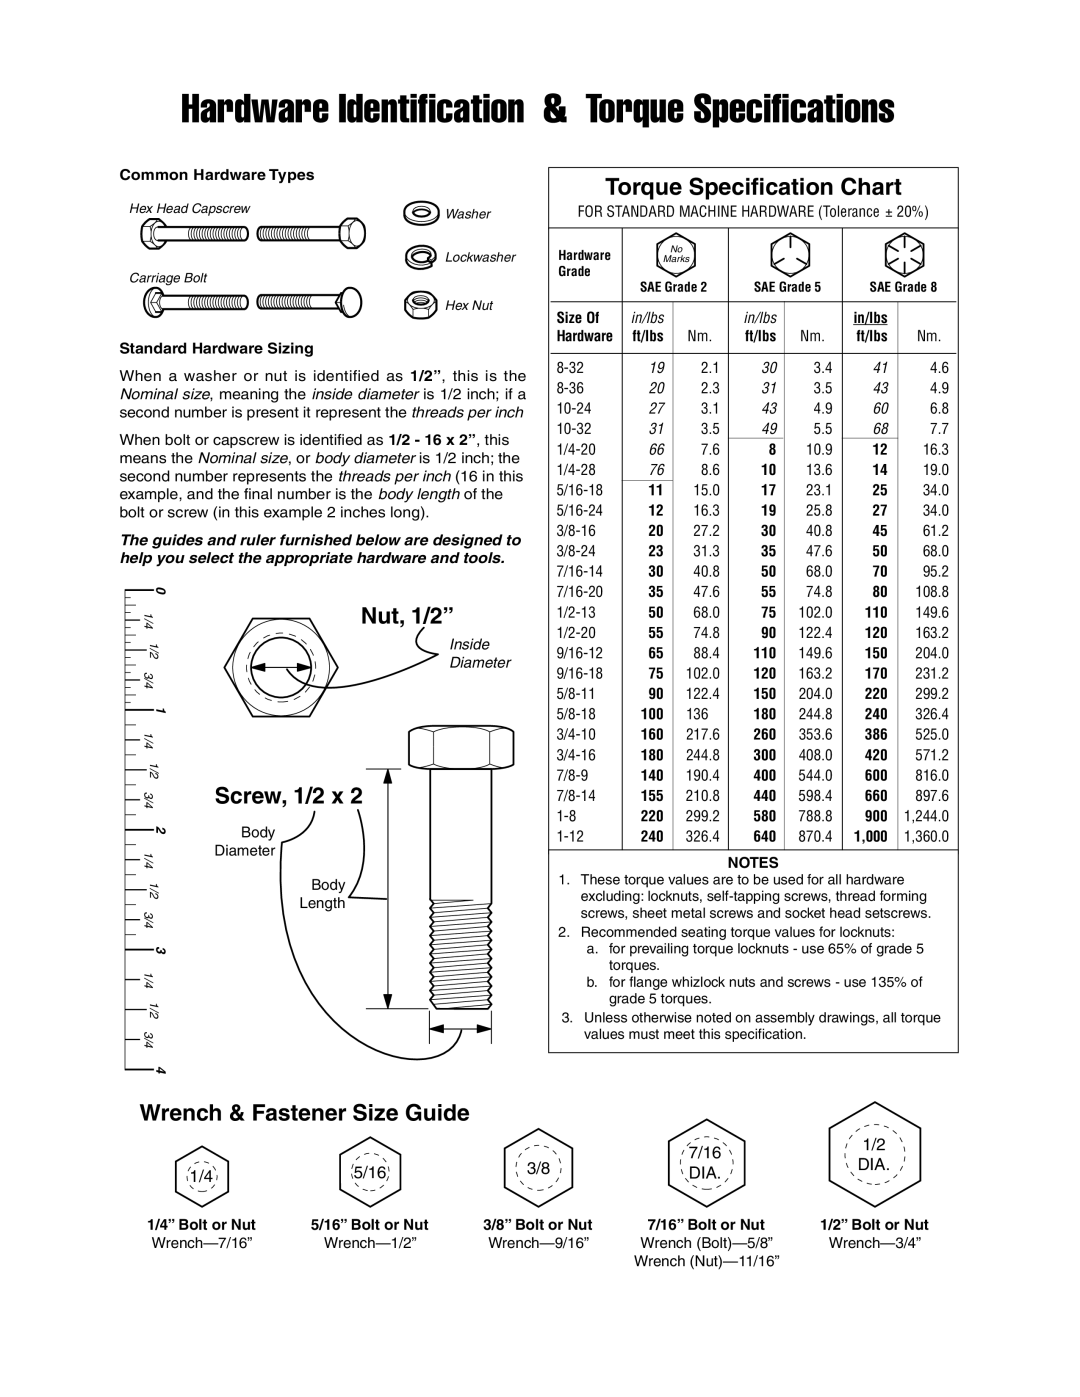 Snapper 4533 Wrench & Fastener Size Guide, Hardware Identification & Torque Specifications, Torque Specification Chart 